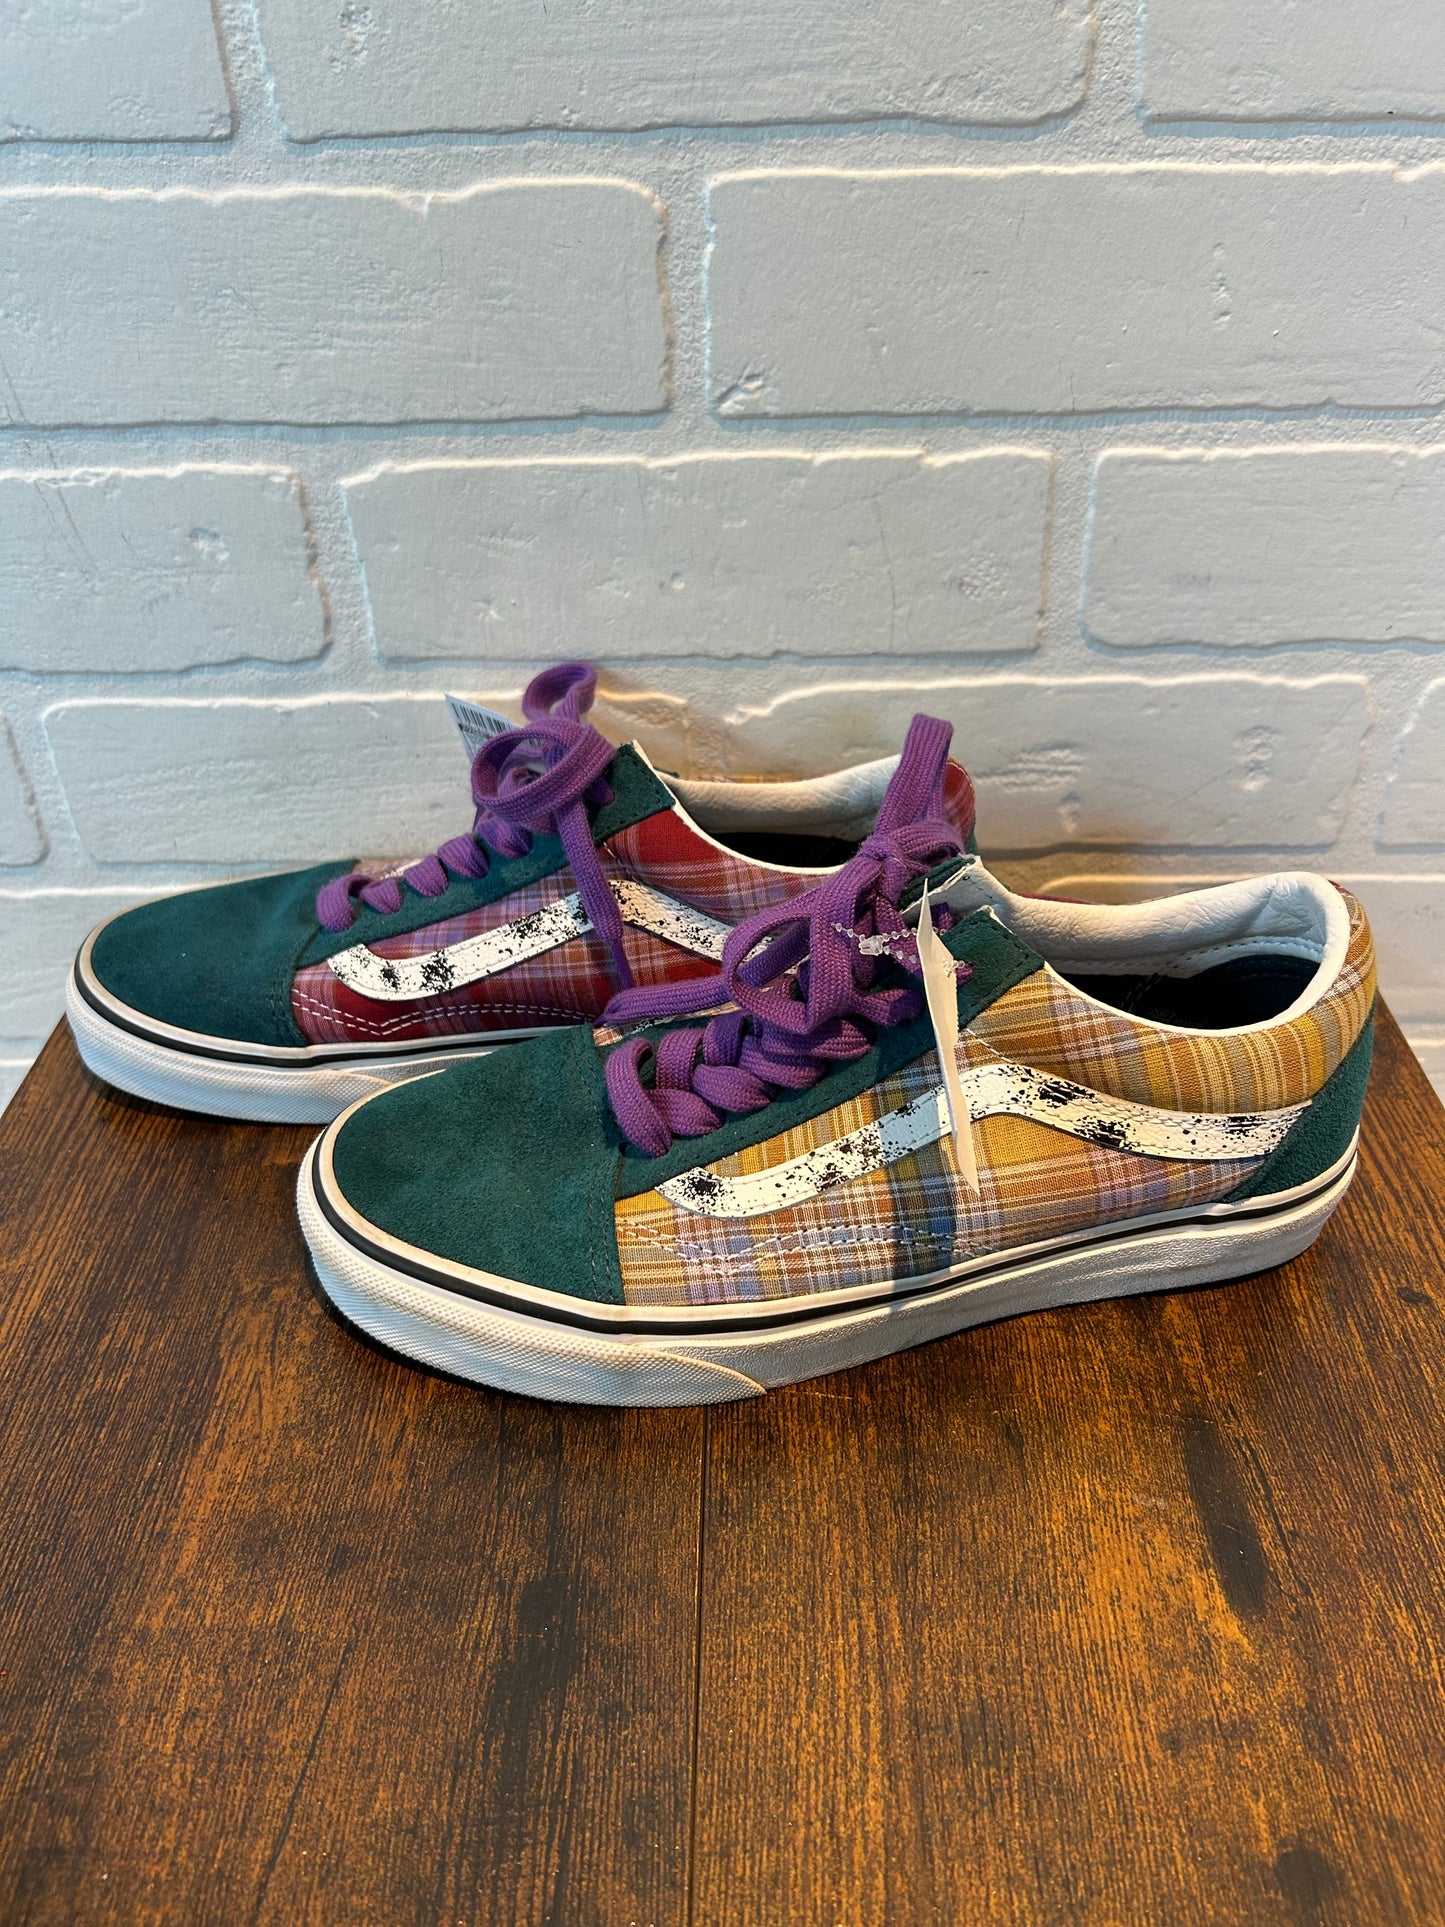 Green Shoes Sneakers Vans, Size 7.5